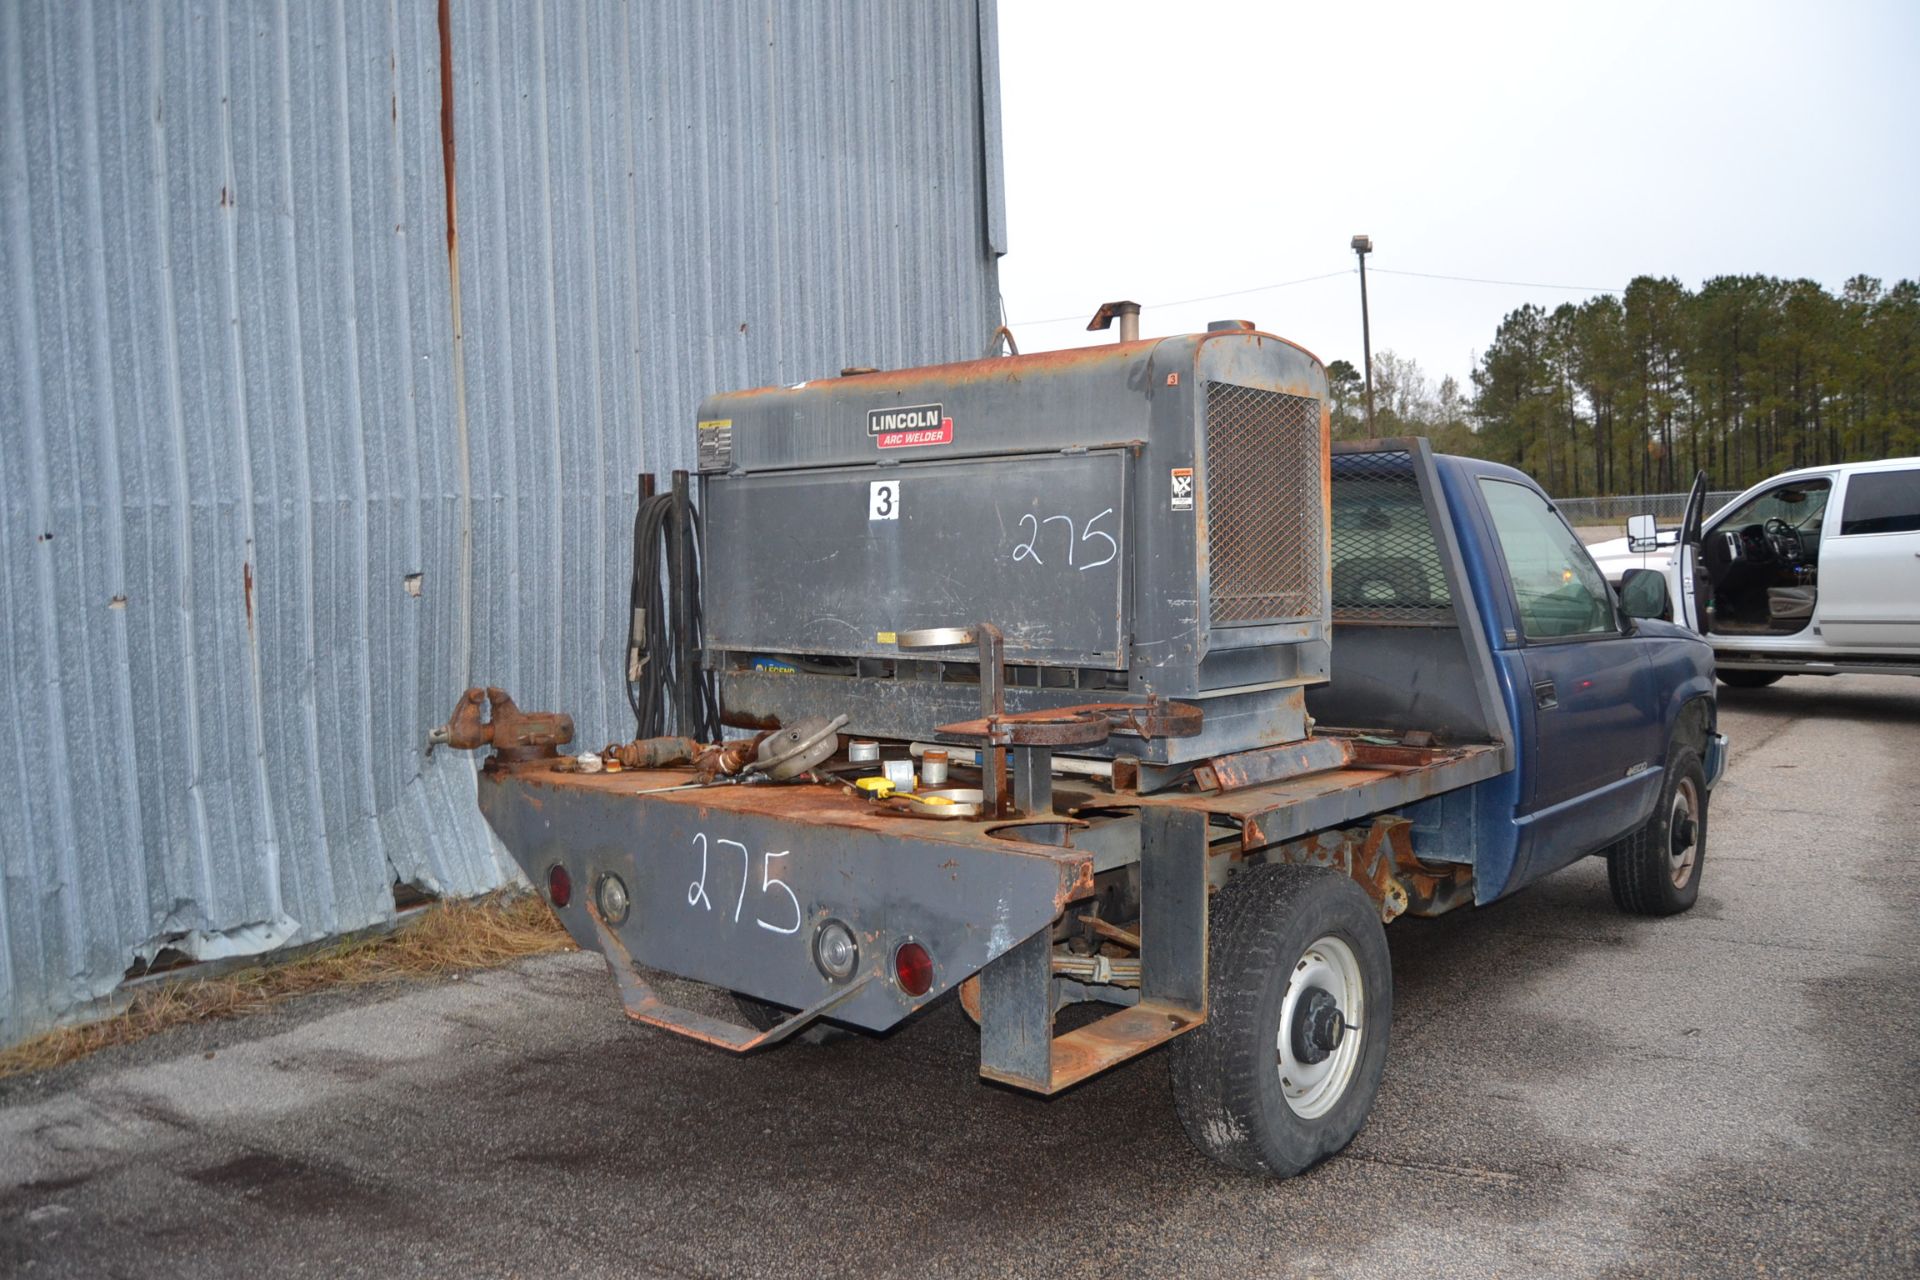 1993 CHEVROLET 1500 GAS ENGINE TRUCK 4 X 4 W/ AUTO TRANSMISSION NO TITLE NEEDS REPAIR W/ LINCOLN - Image 2 of 2